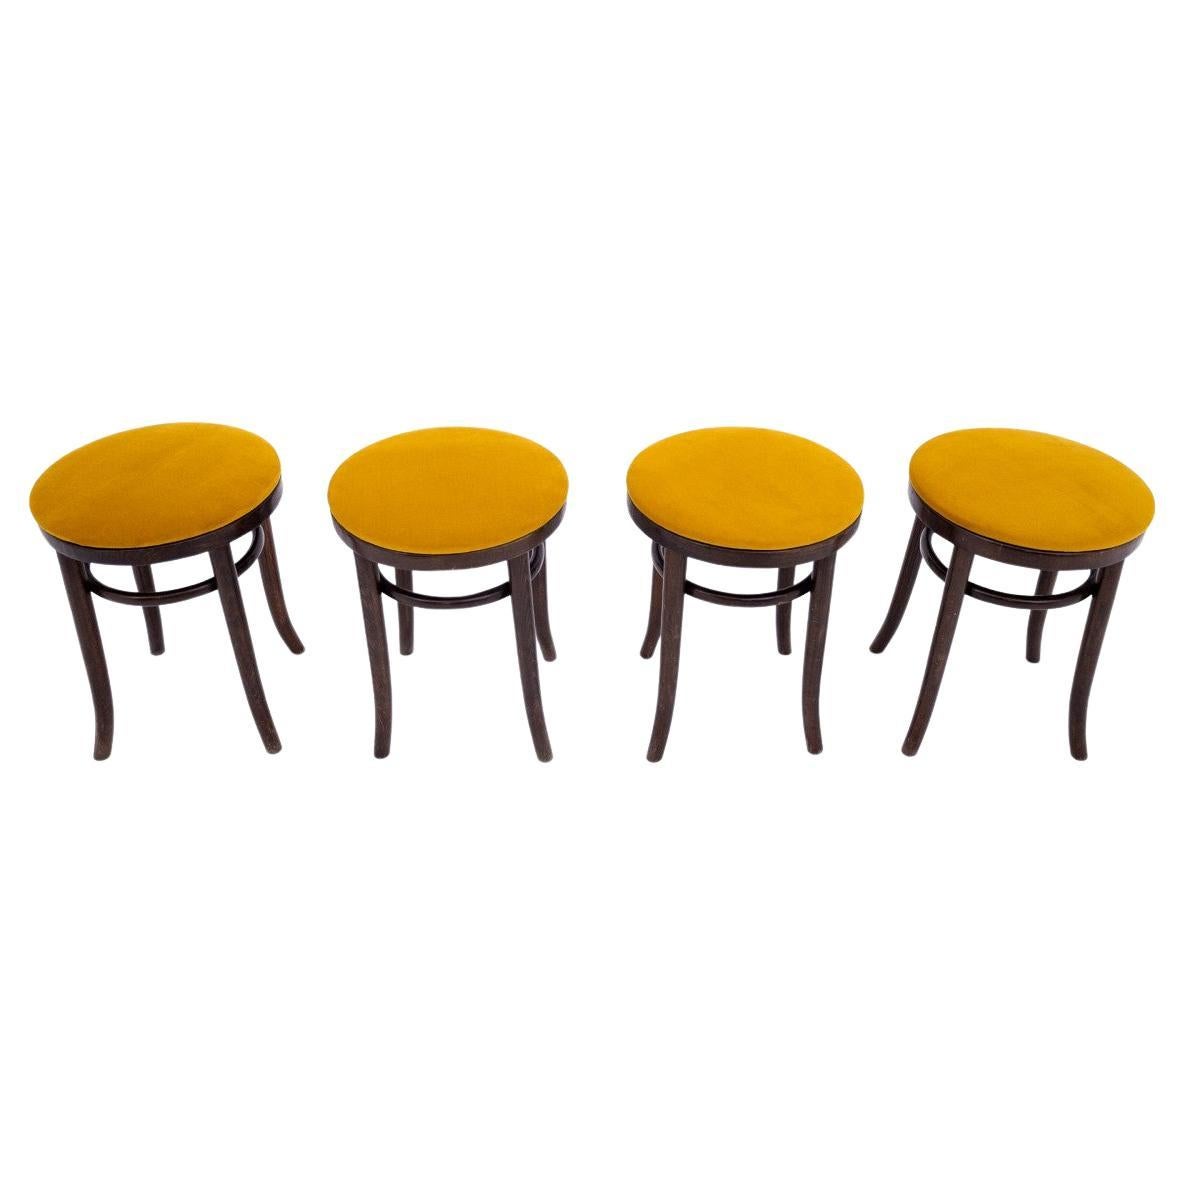 Set of four Thonet stools, Germany, 1930s. After renovation.8608